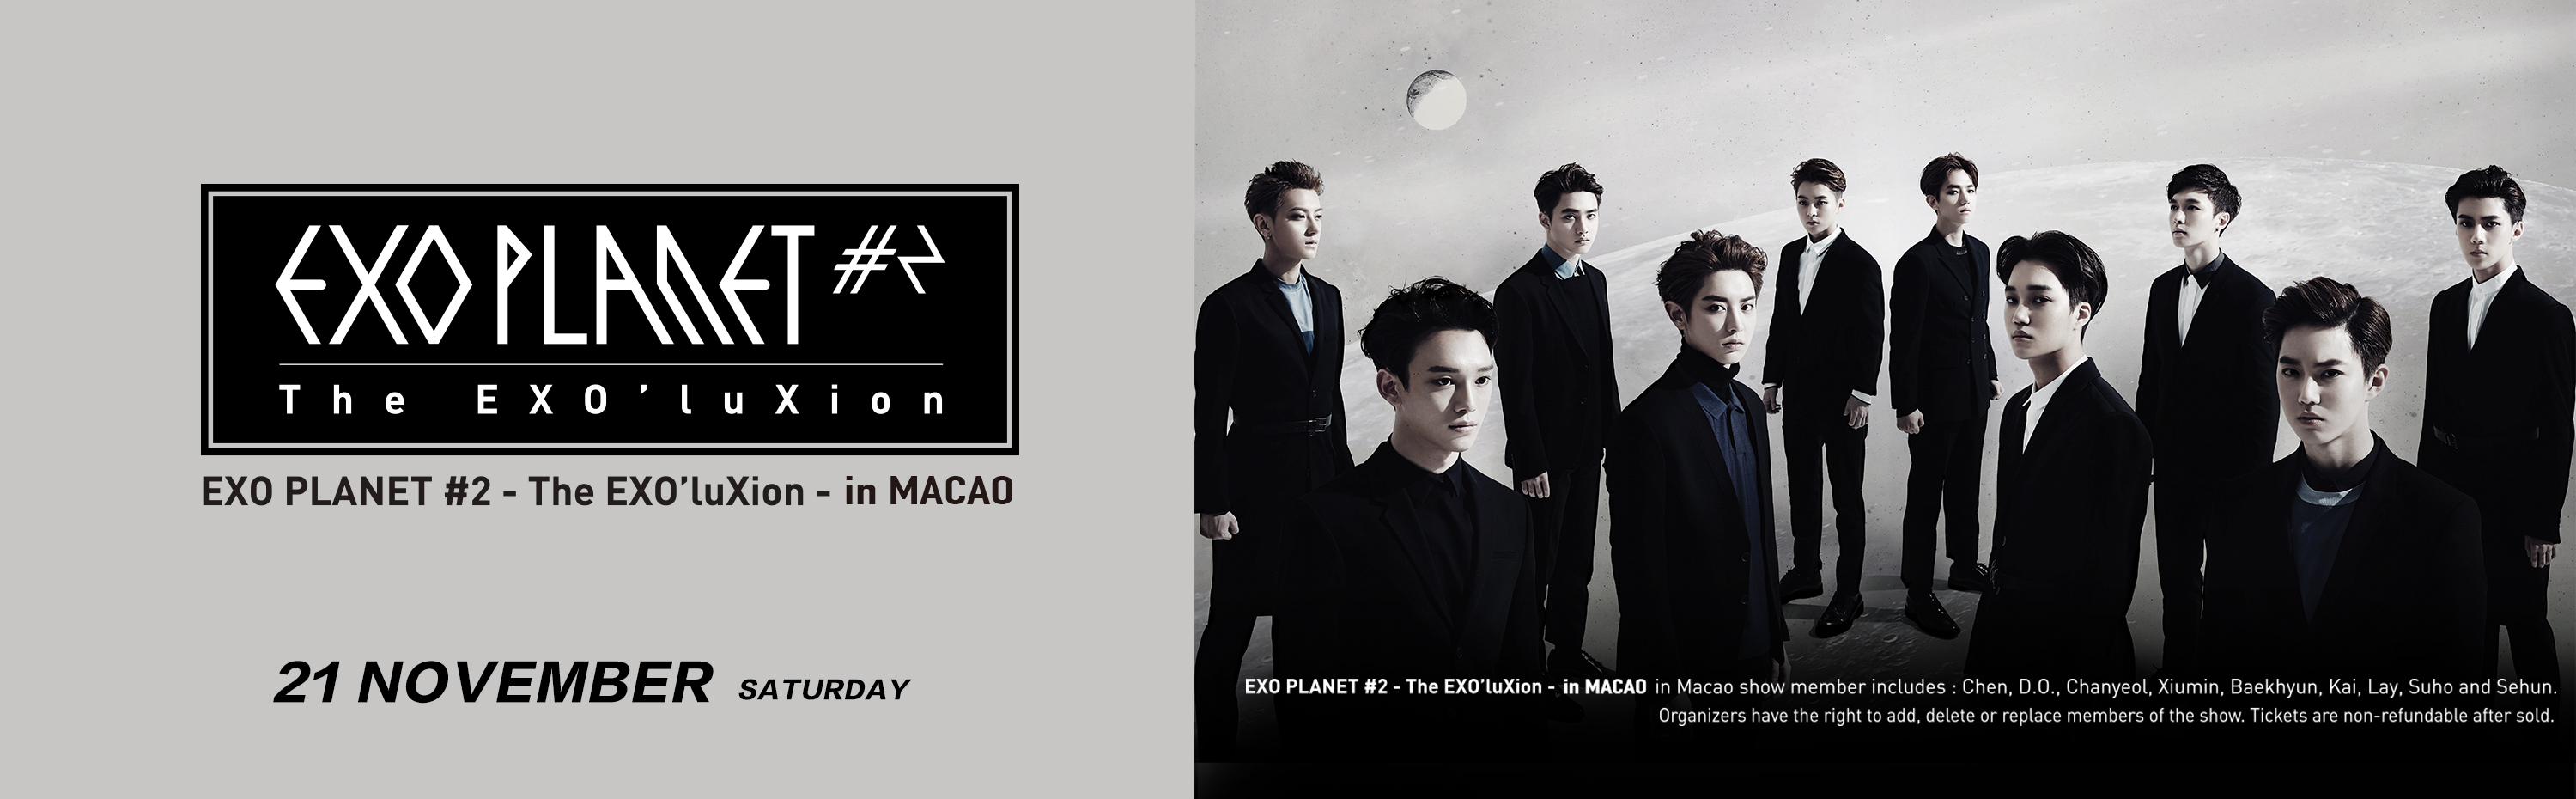 EXO PLANET #2 - The EXO'luXion - in MACAO 